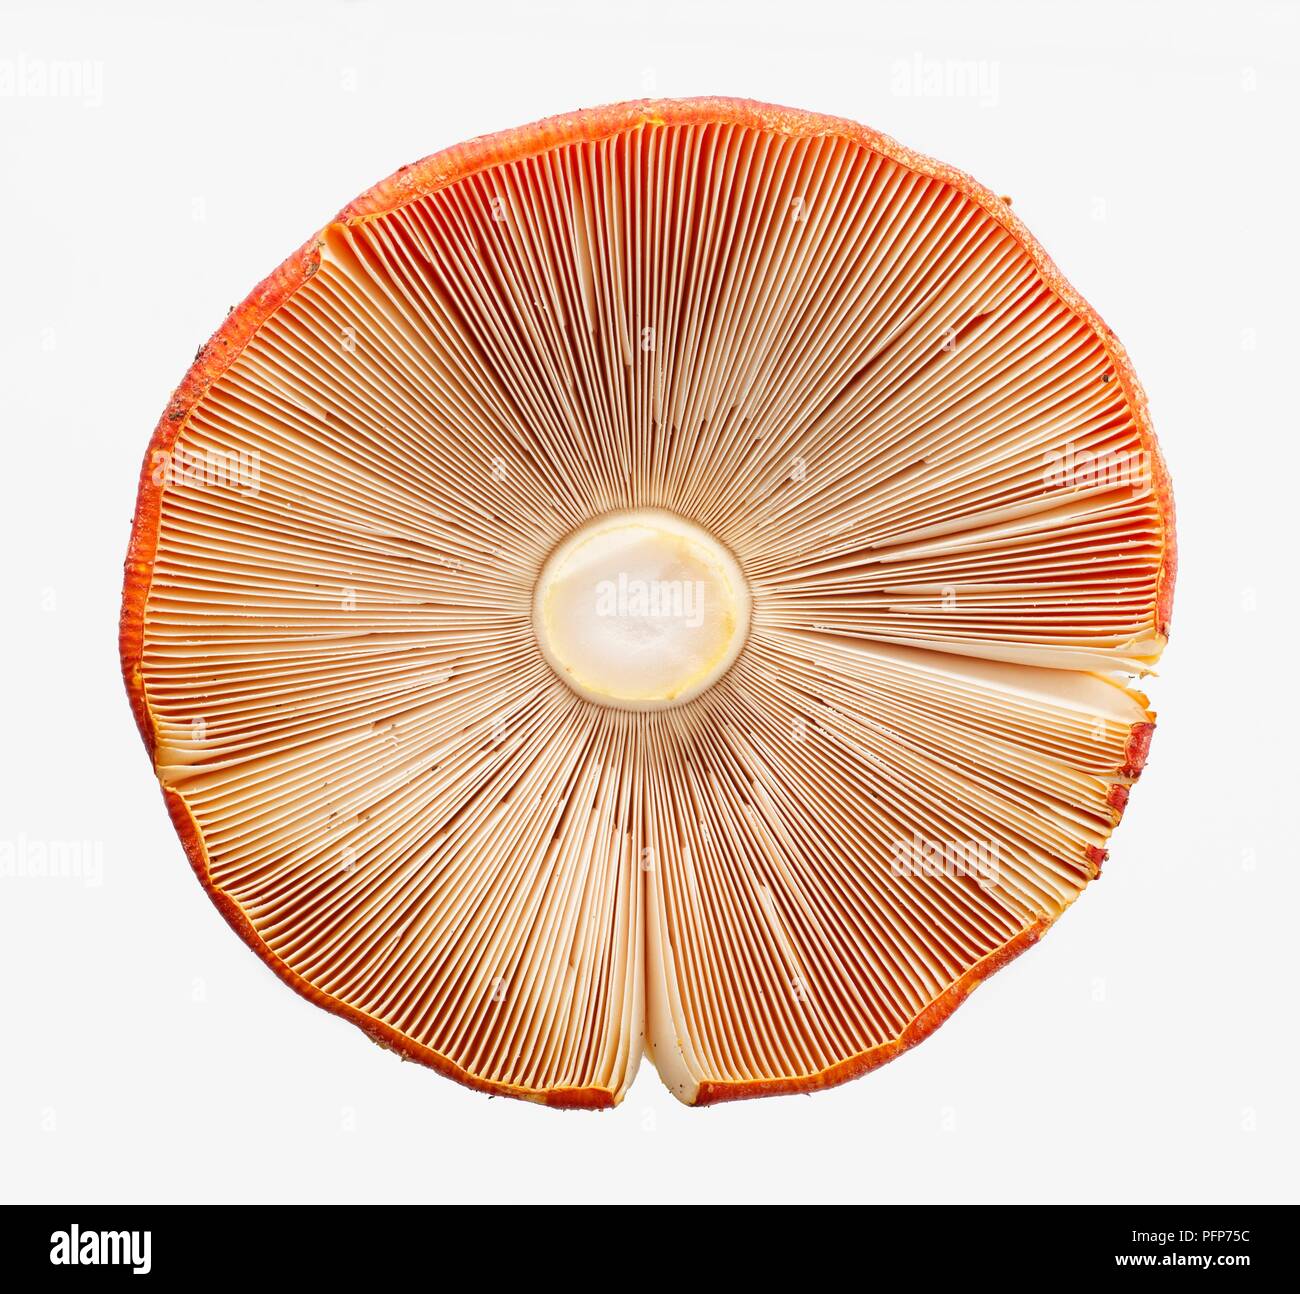 Amanita muscaria (Fly agaric), cap seen from below Stock Photo